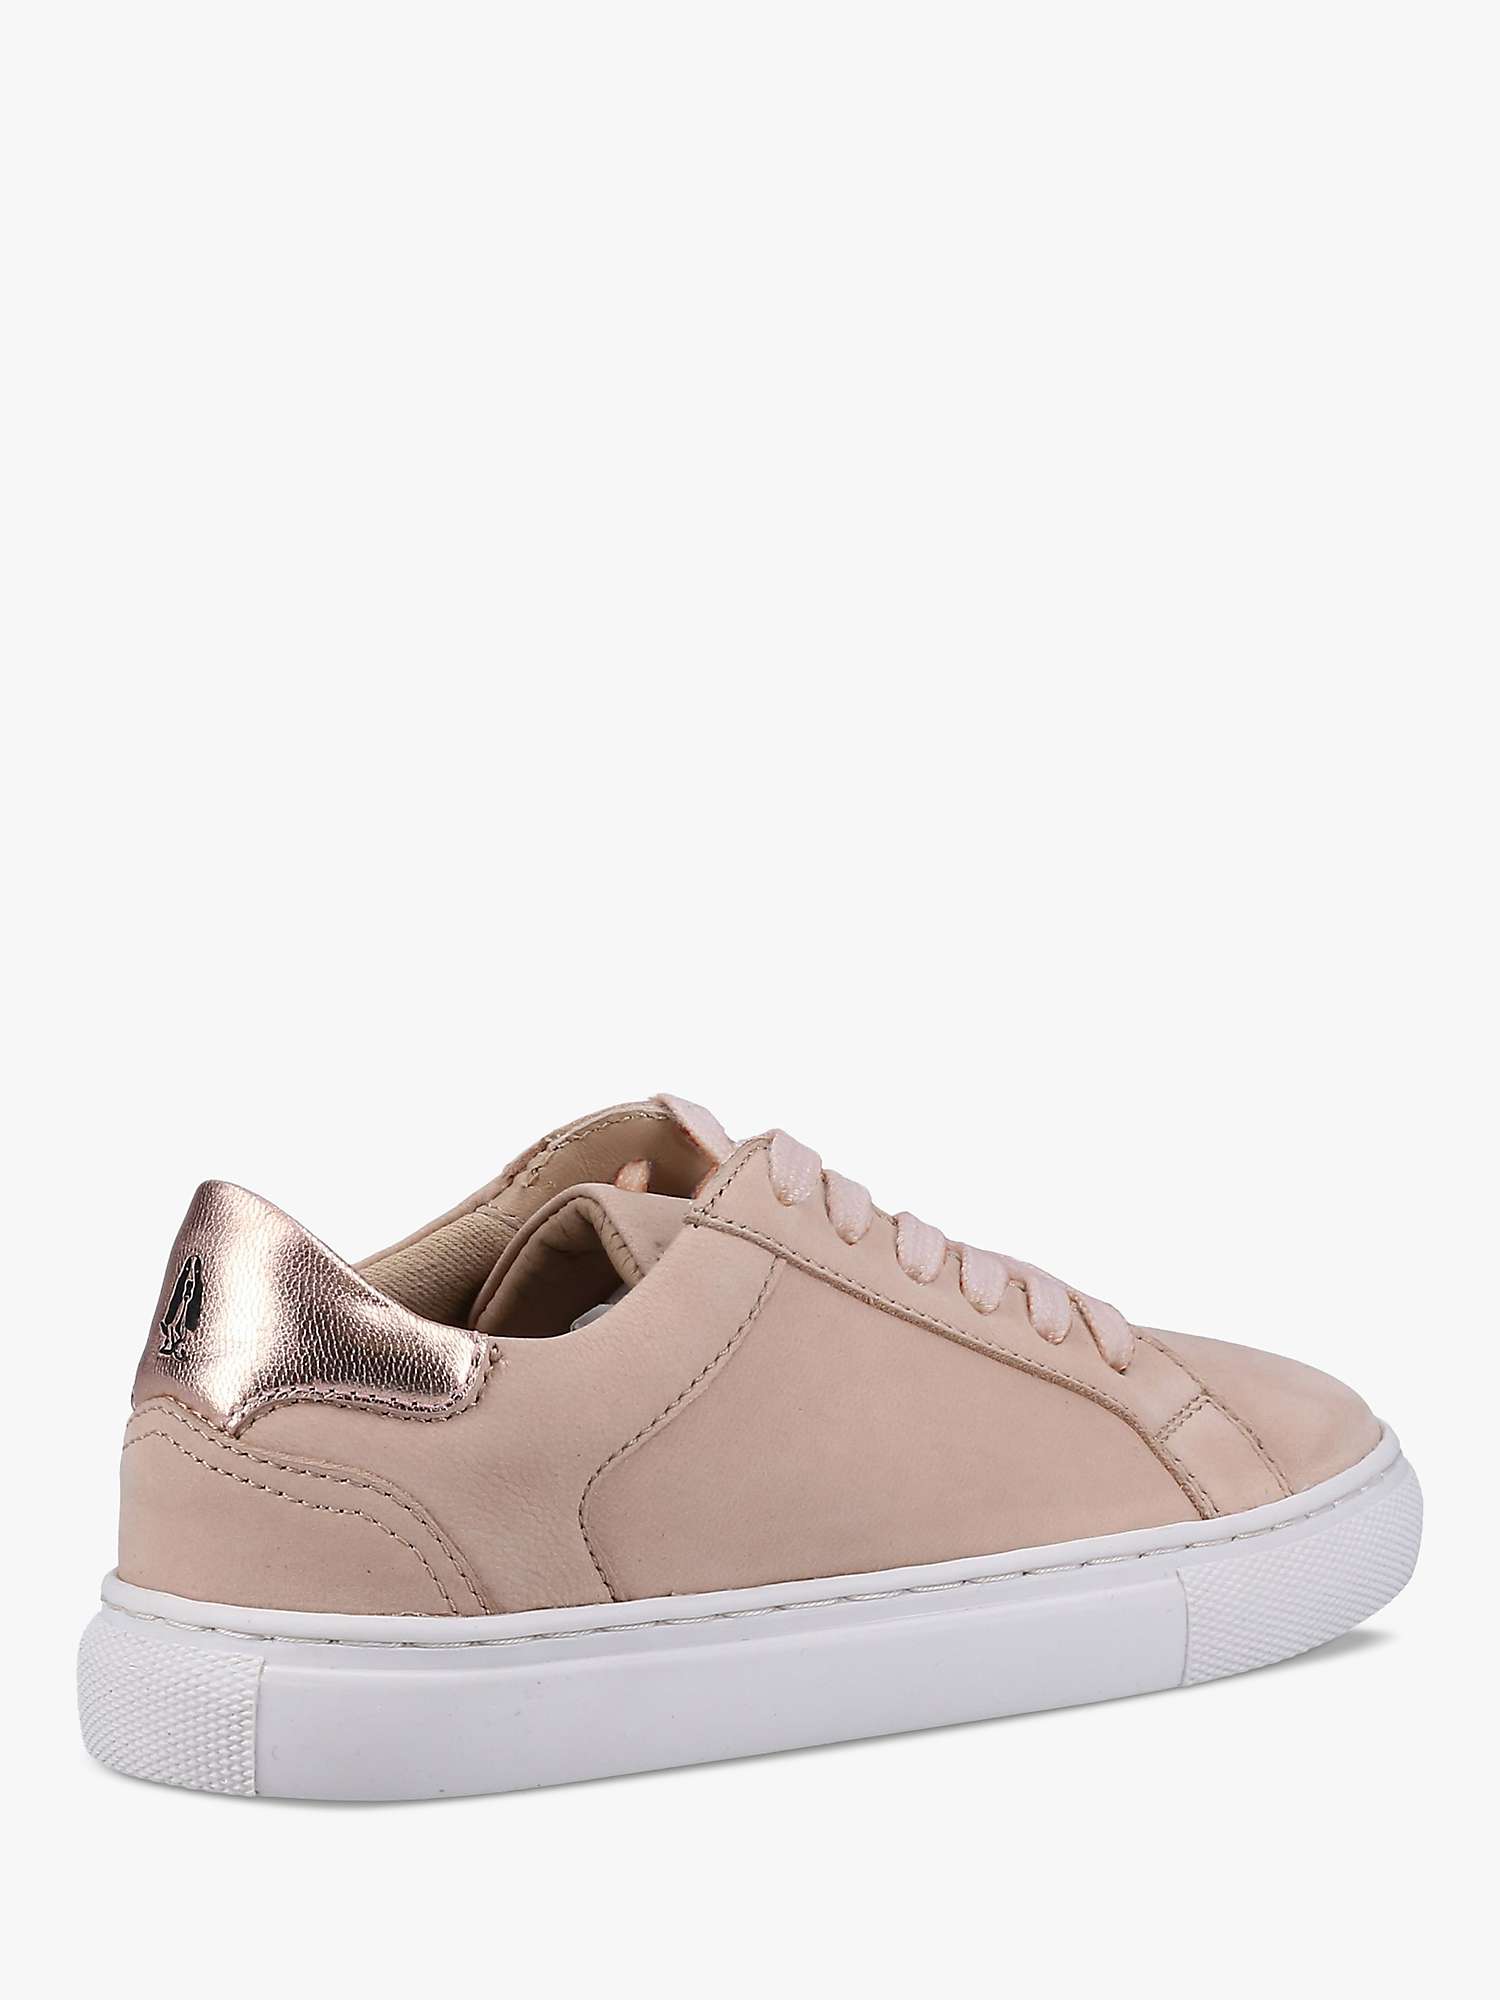 Buy Hush Puppies Kids' Mini Camille Leather Trainers Online at johnlewis.com